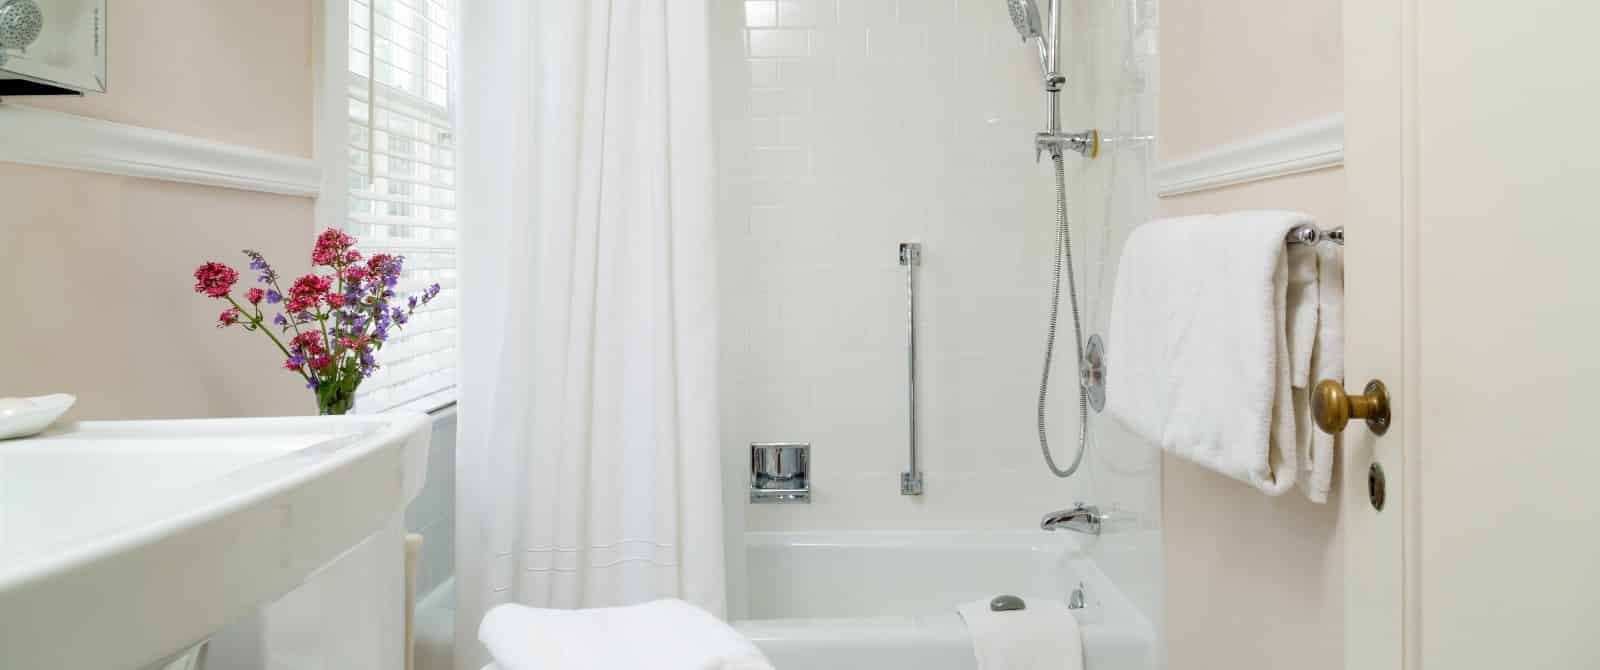 Bathroom with light colored walls, white trim, white sink, and white tub with shower